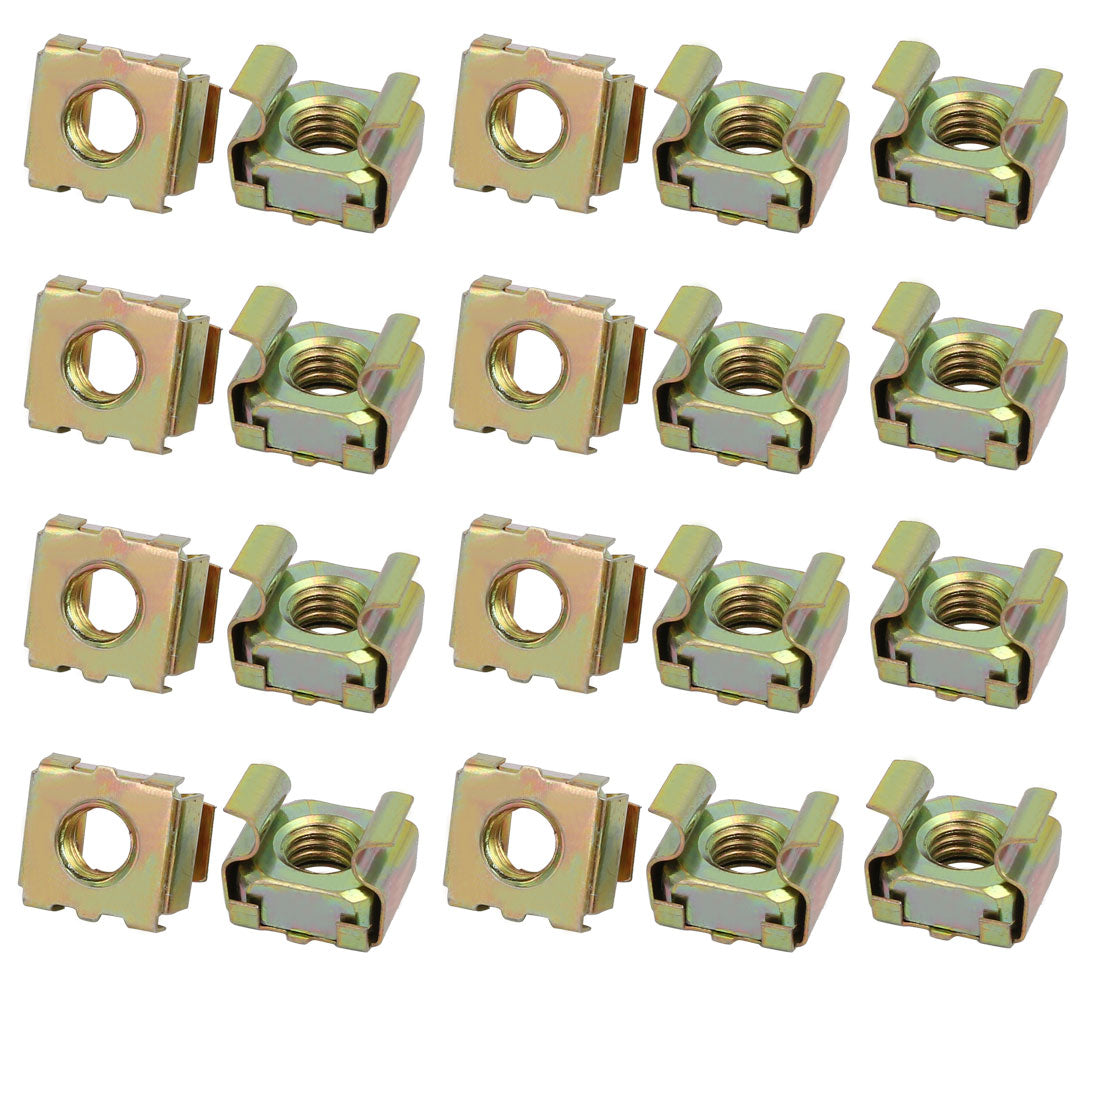 uxcell Uxcell 20pcs M6 65Mn Spring Steel Captive Cage Nut Bronze Tone for Server Shelf Cabinet